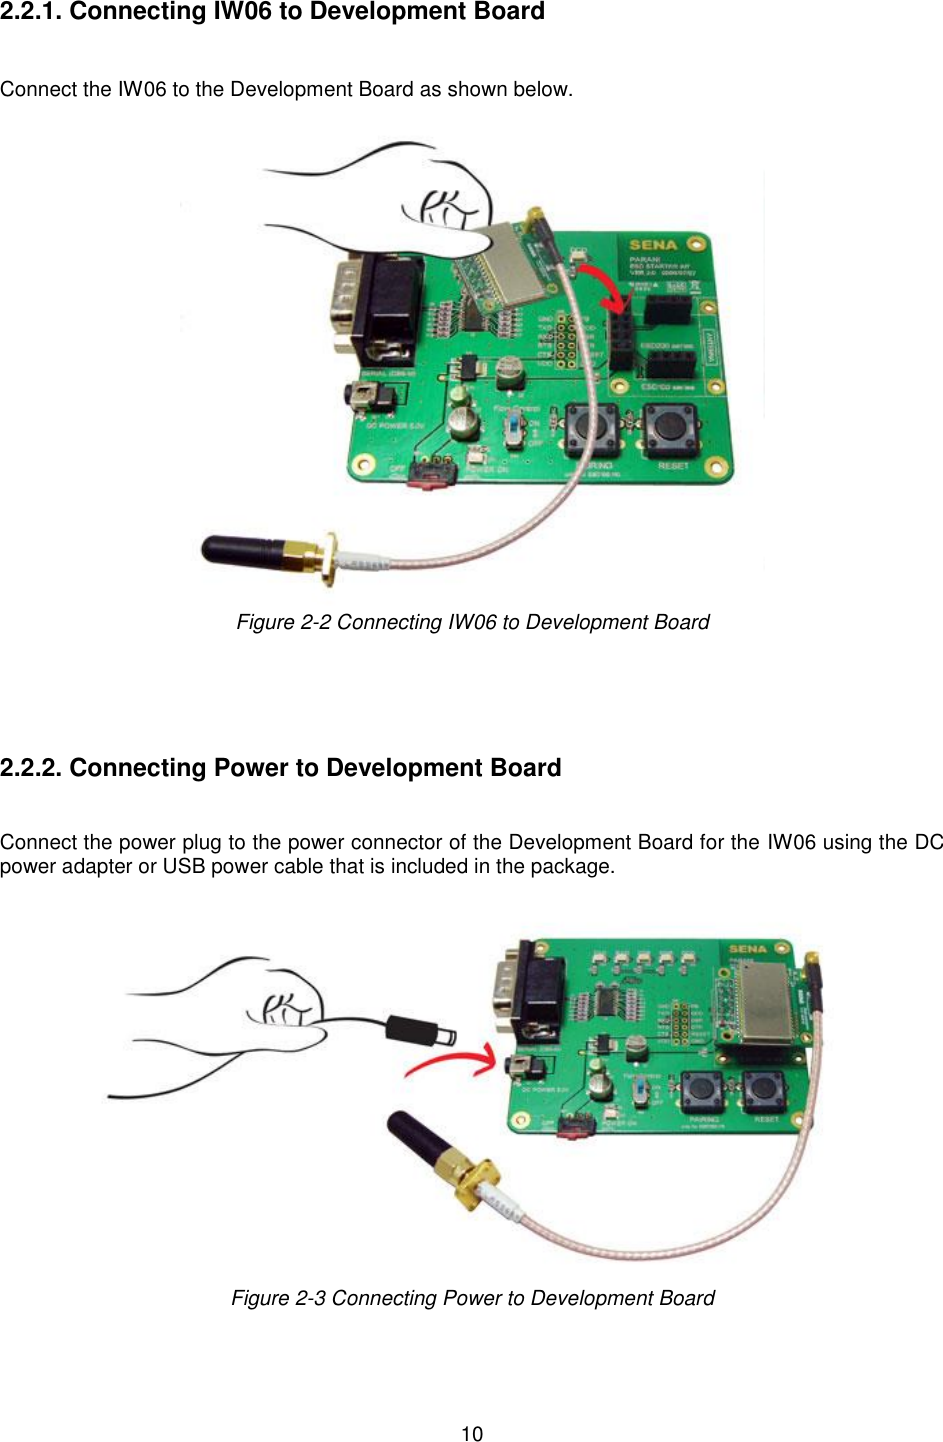   10  2.2.1. Connecting IW06 to Development Board   Connect the IW06 to the Development Board as shown below.   Figure 2-2 Connecting IW06 to Development Board      2.2.2. Connecting Power to Development Board   Connect the power plug to the power connector of the Development Board for the IW06 using the DC power adapter or USB power cable that is included in the package.     Figure 2-3 Connecting Power to Development Board   